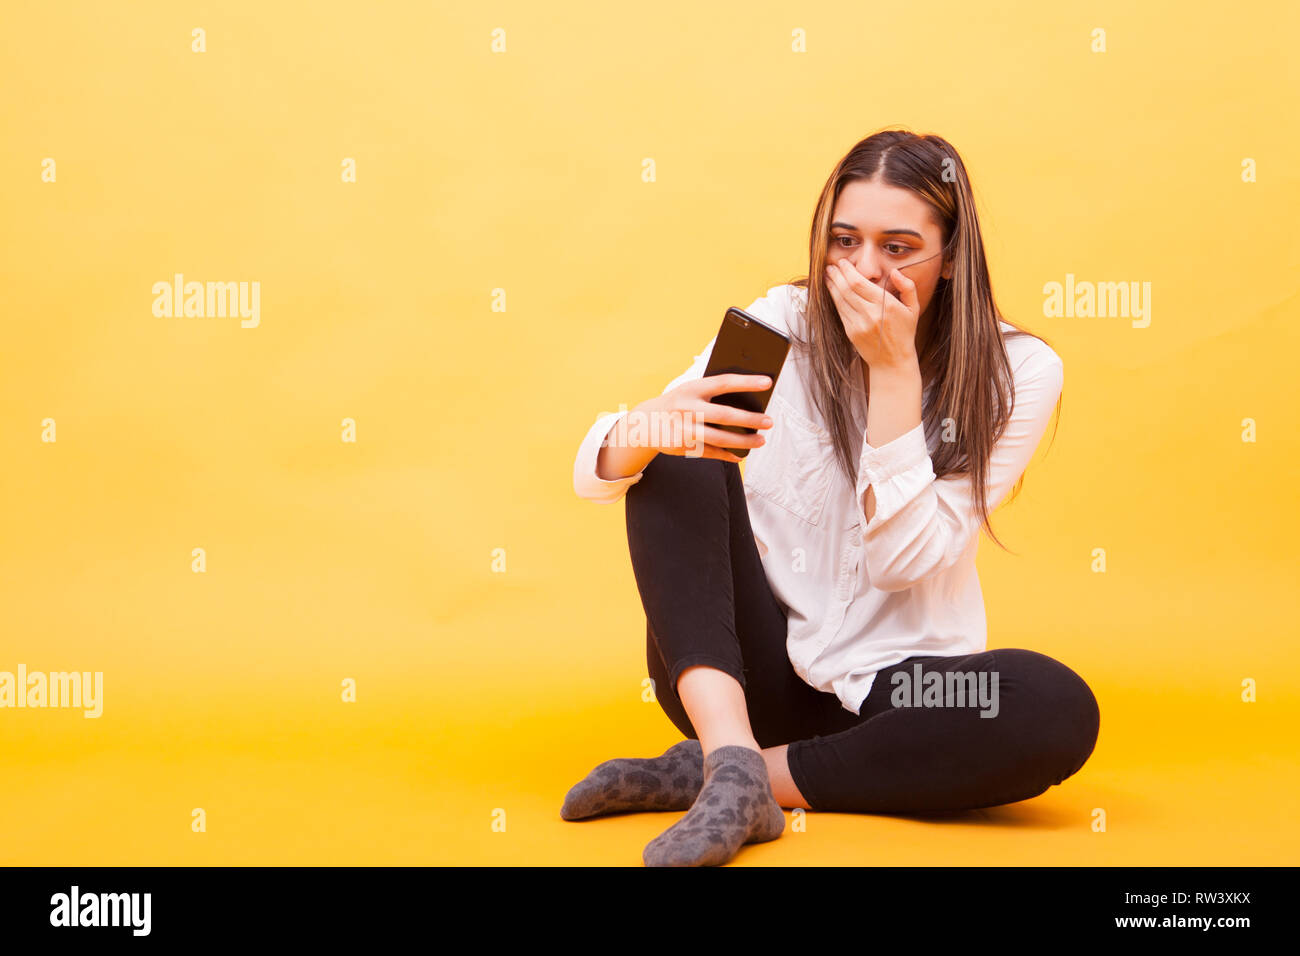 Girl looking shocked at her phone while sitting down over yellow background. Facial expression Stock Photo